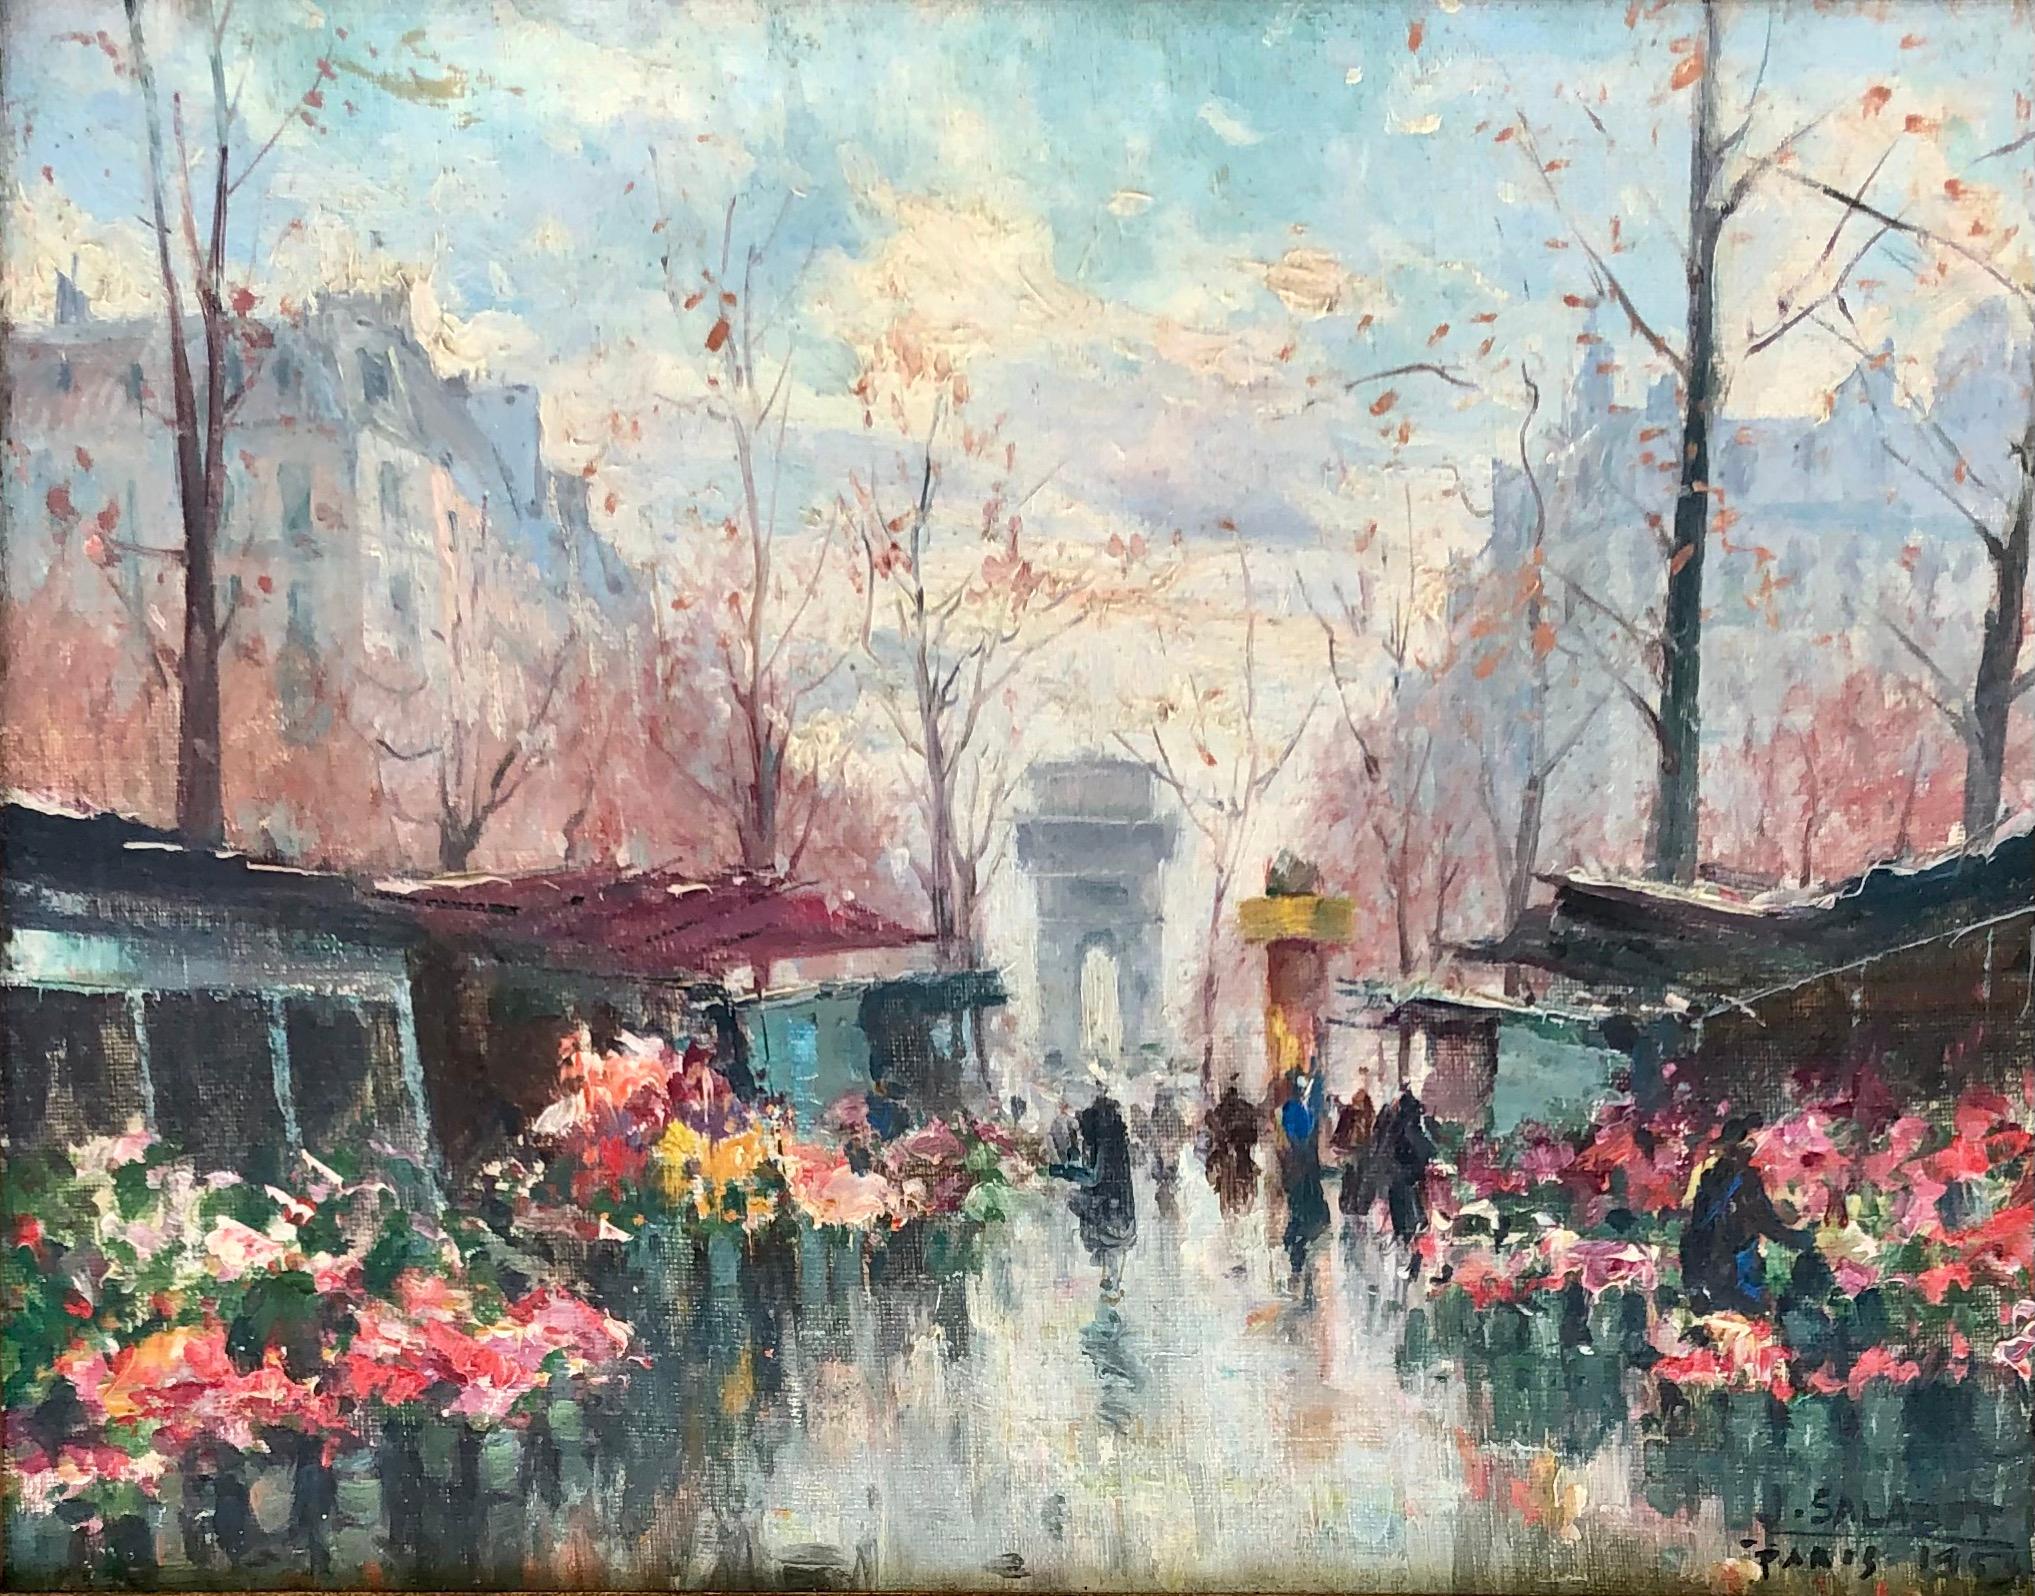 Oil on canvas, signed and dated 53' lower left.

Jean Salabet was a painter well know for his colorful Parisian cityscapes.
His work is from the same school or painter as Jules Herve, Antoine Blanchard, and Edouard Cortes.

This painting